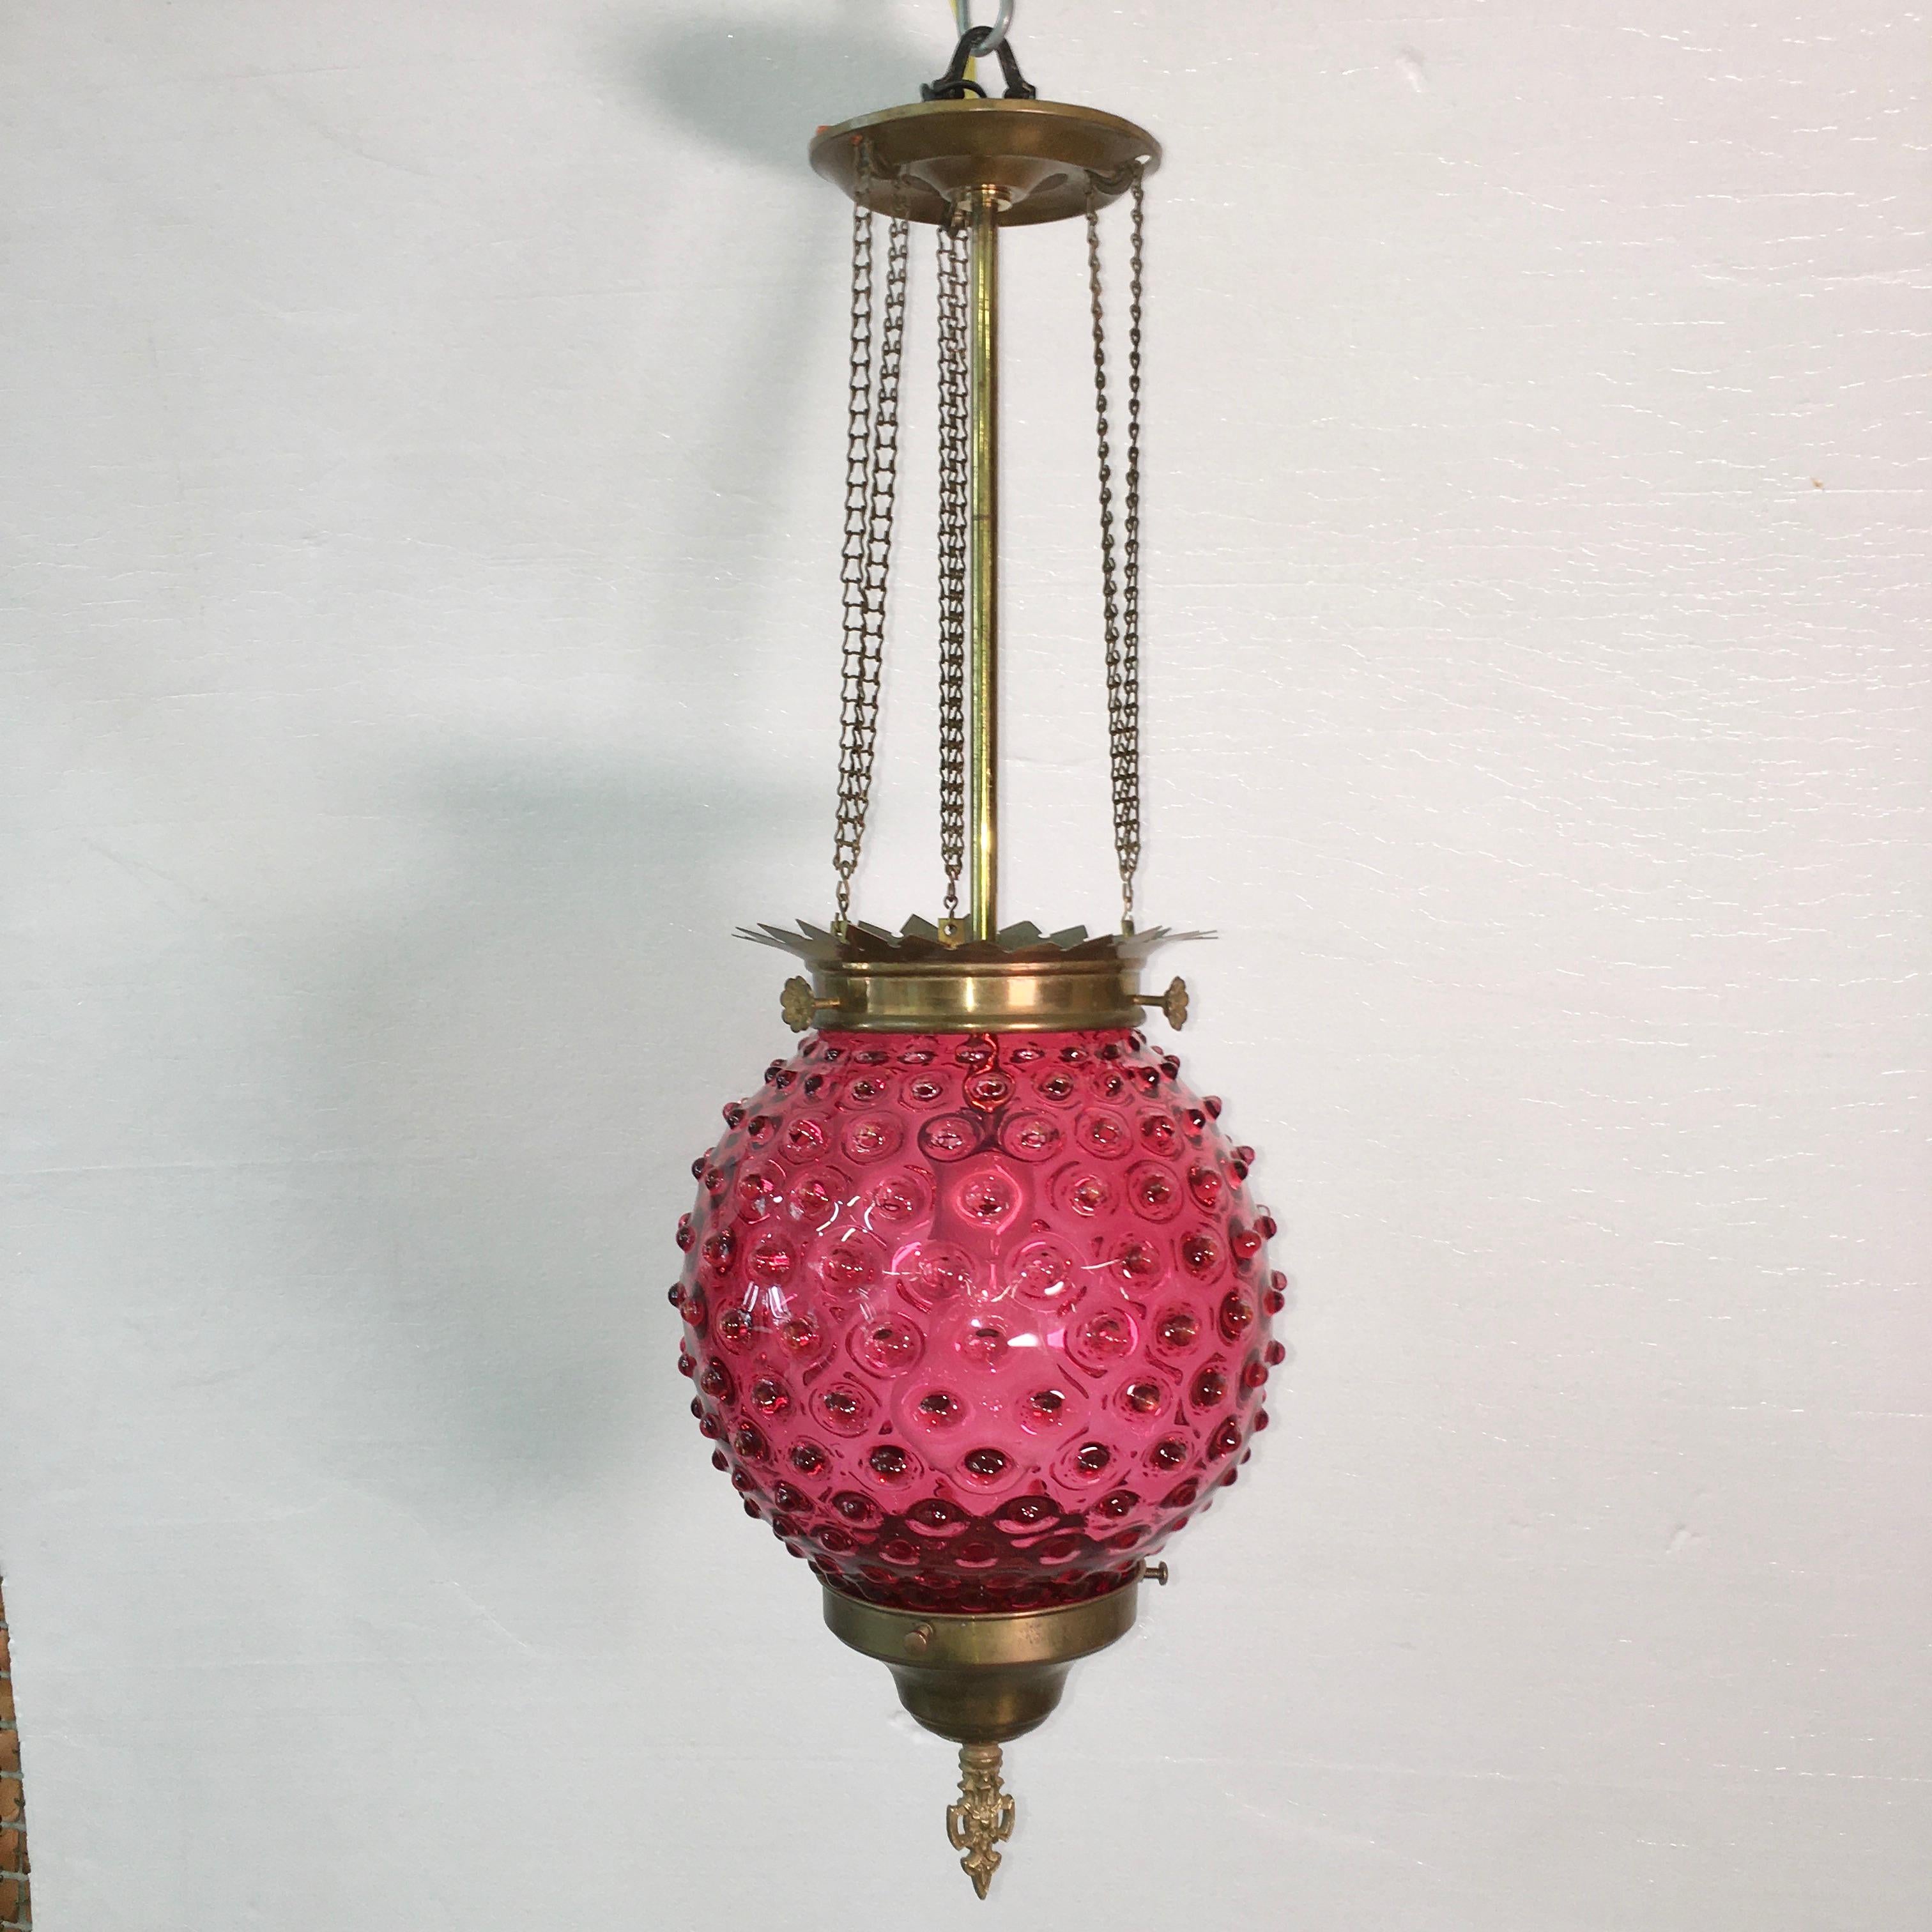 Antique electrified kerosene lantern pendant with hobnail motif cranberry glass globe suspended from brass chain. Takes a single standard Edison screw E27 lightbulb up to 100 watts. Rewired. Ready to install.